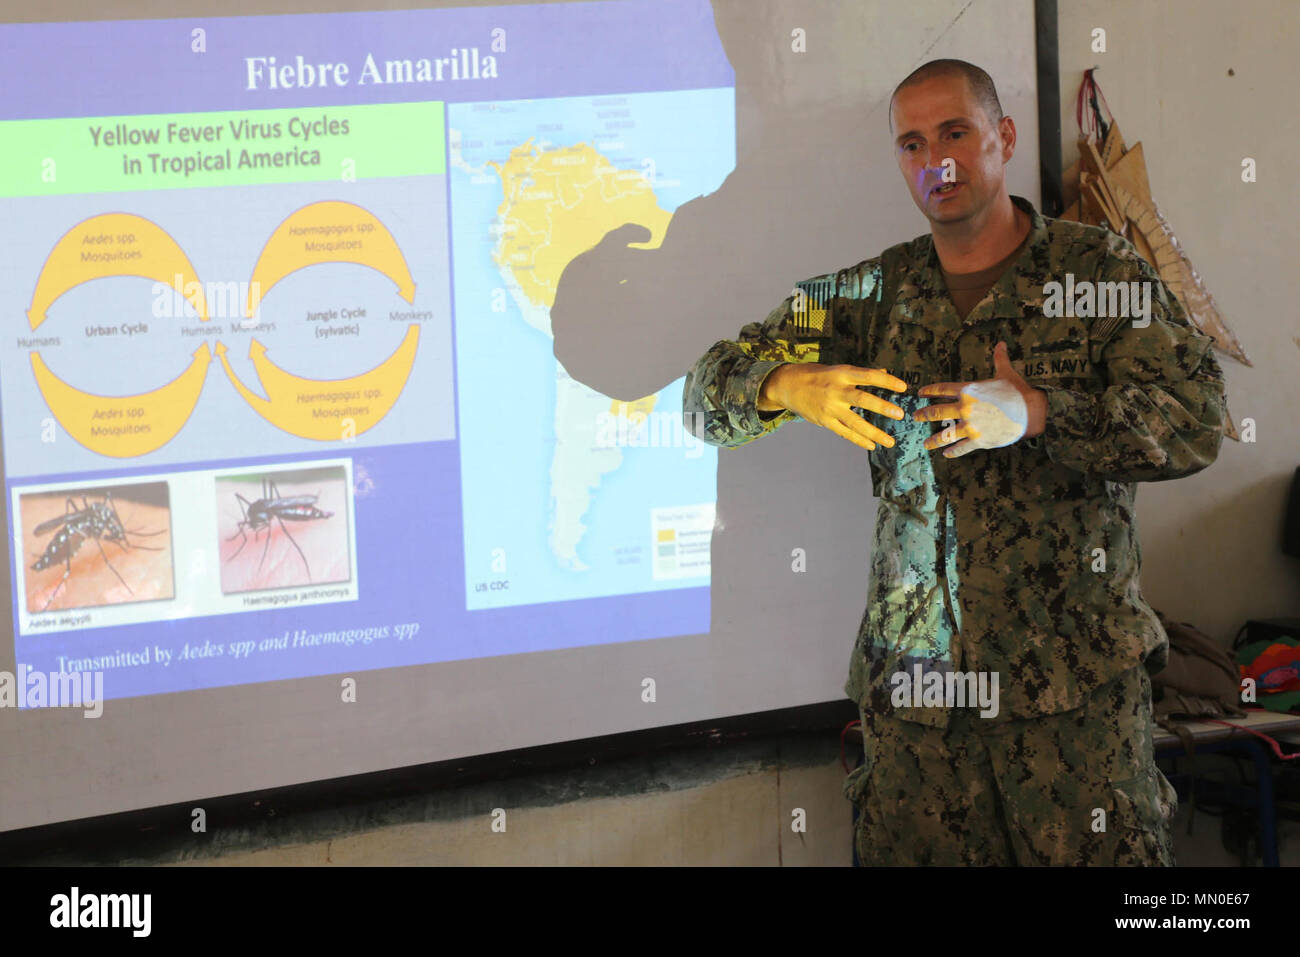 170802-A-QE286-0096 SANTA ROSA DE AGUAN, Honduras (August 2, 2017) Lt. Cmdr. Ian Sutherland, technical director for the Navy Entomology Center of Excellence, gives a presentation on yellow fever at a medical school in Santa Rosa de Aguan, during Southern Partnership Station 17. SPS-EPF 17 is a U.S. Navy deployment, executed by U.S. Naval Forces Southern Command/U.S. 4th Fleet, focused on subject matter expert exchanges with partner nation militaries and security forces in Central and South America. (U.S. Army photo by SPC Judge Jones/Released) Stock Photo